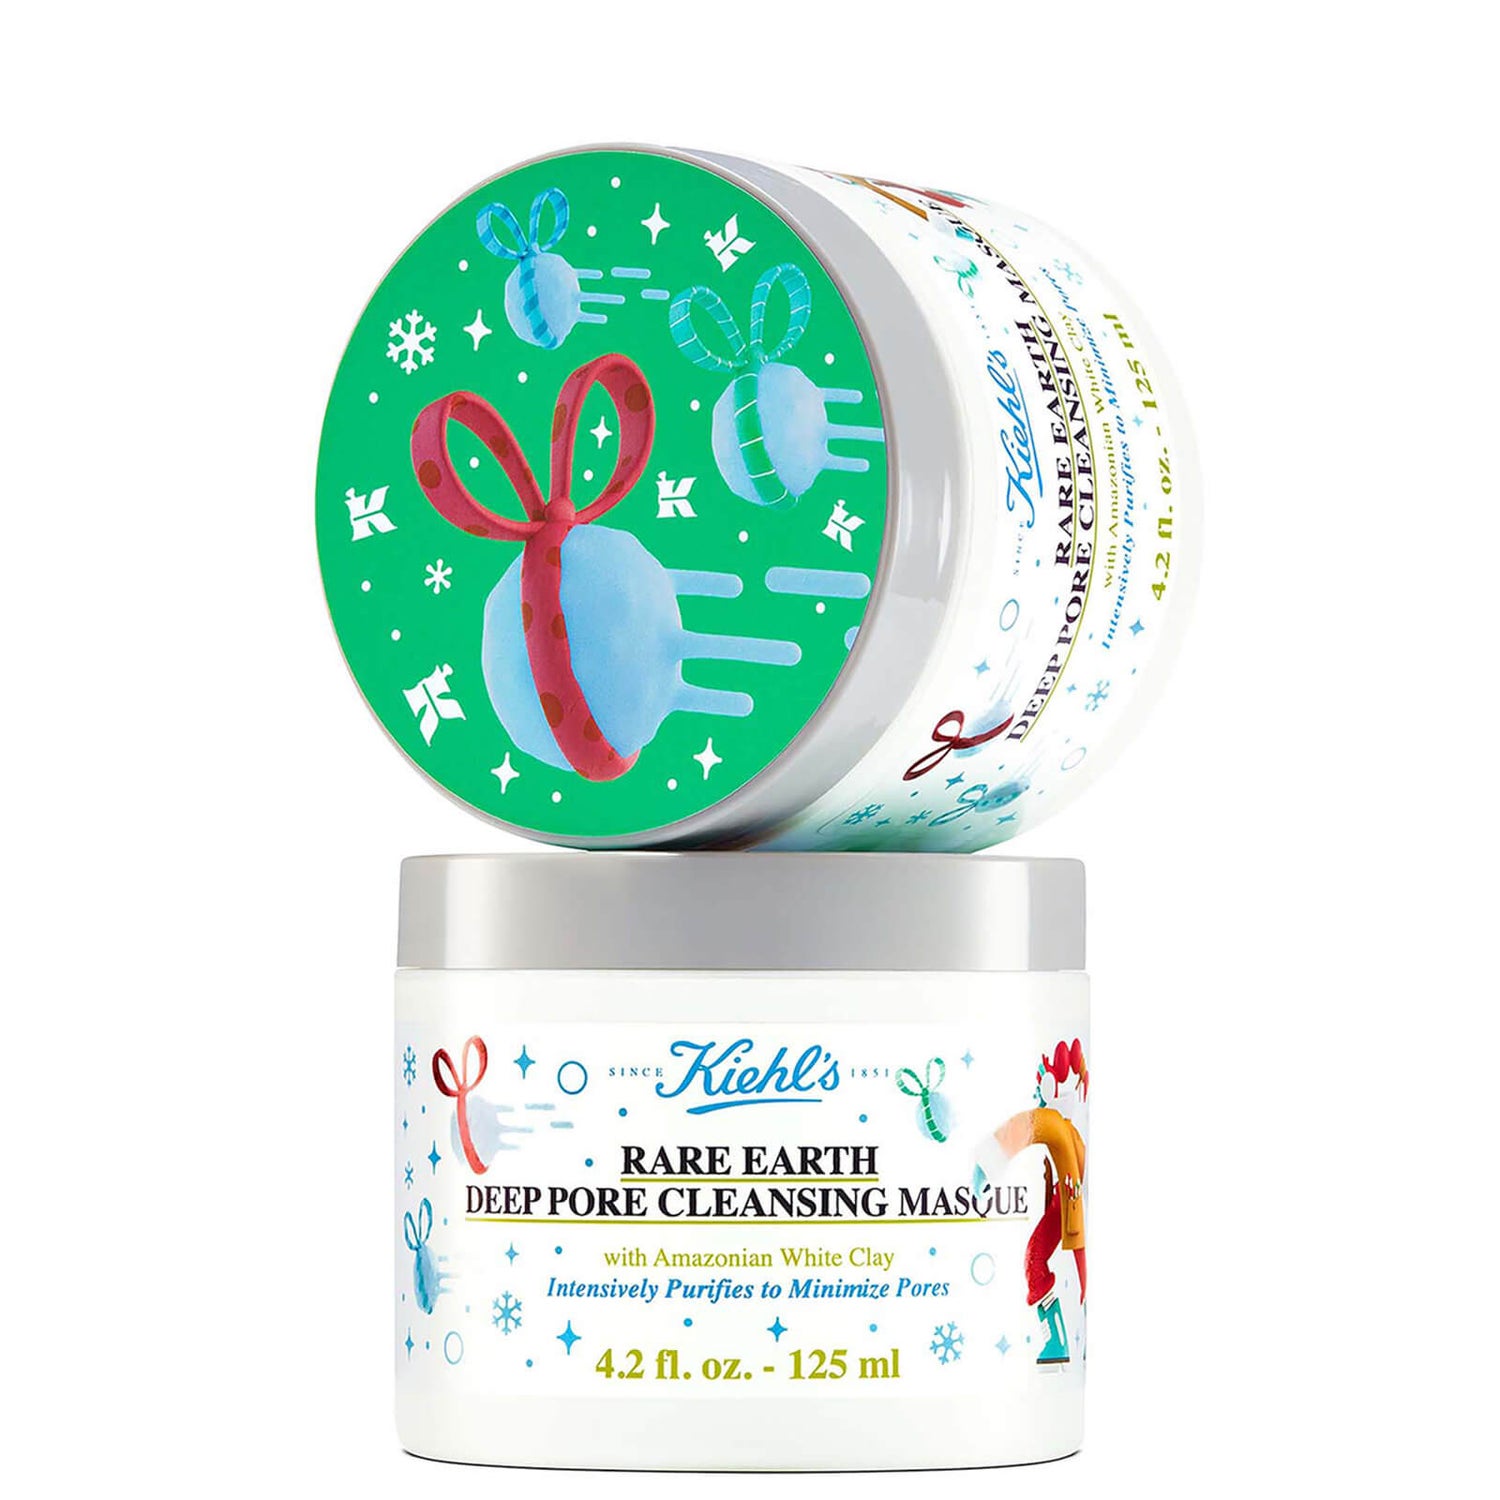 Kiehl's Rare Earth Deep Pore Cleansing Masque Limited Edition 125ml